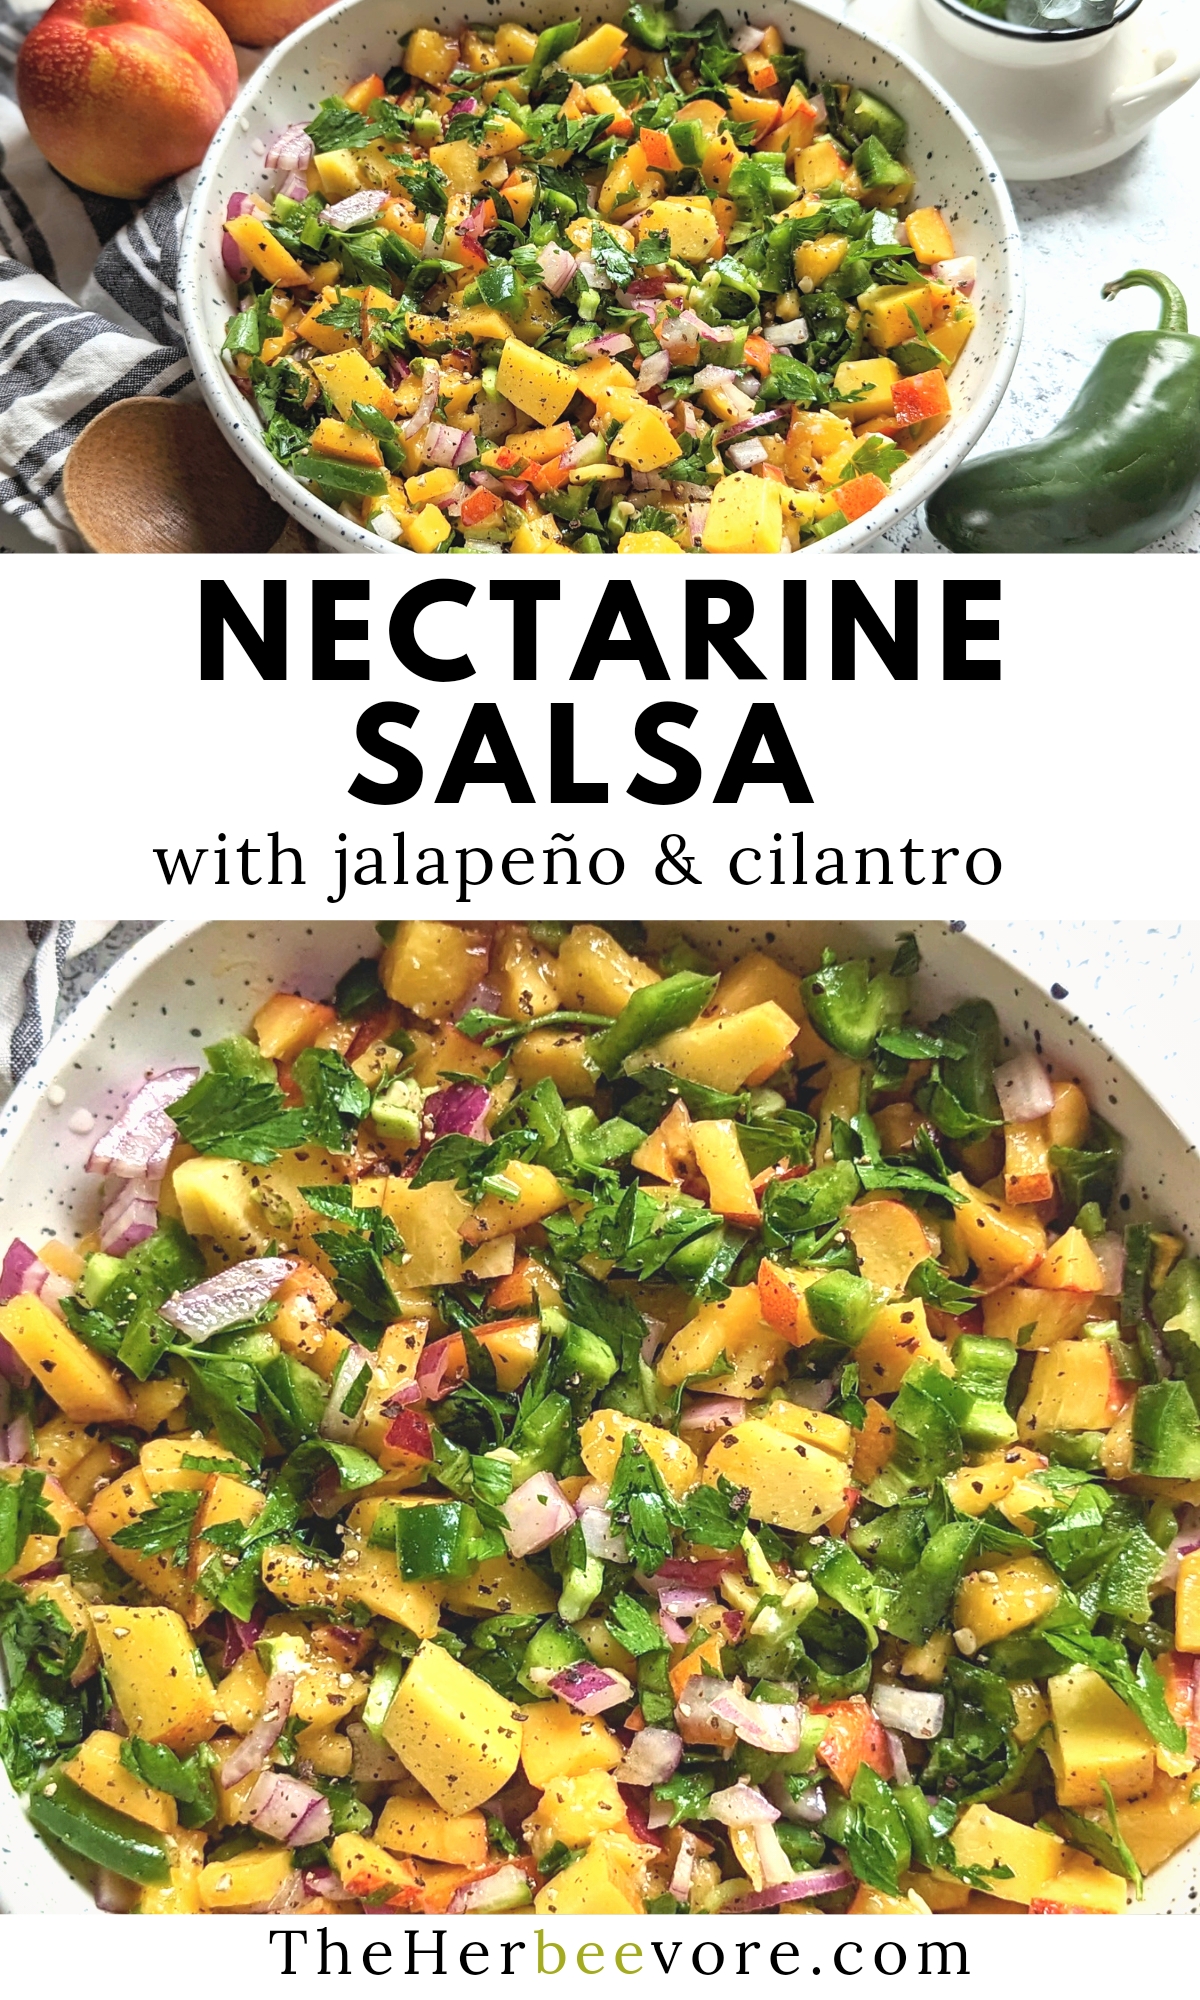 nectarine salsa recipe with jalapeno peppers and cilantro pico de gallo with peaches or nectarines